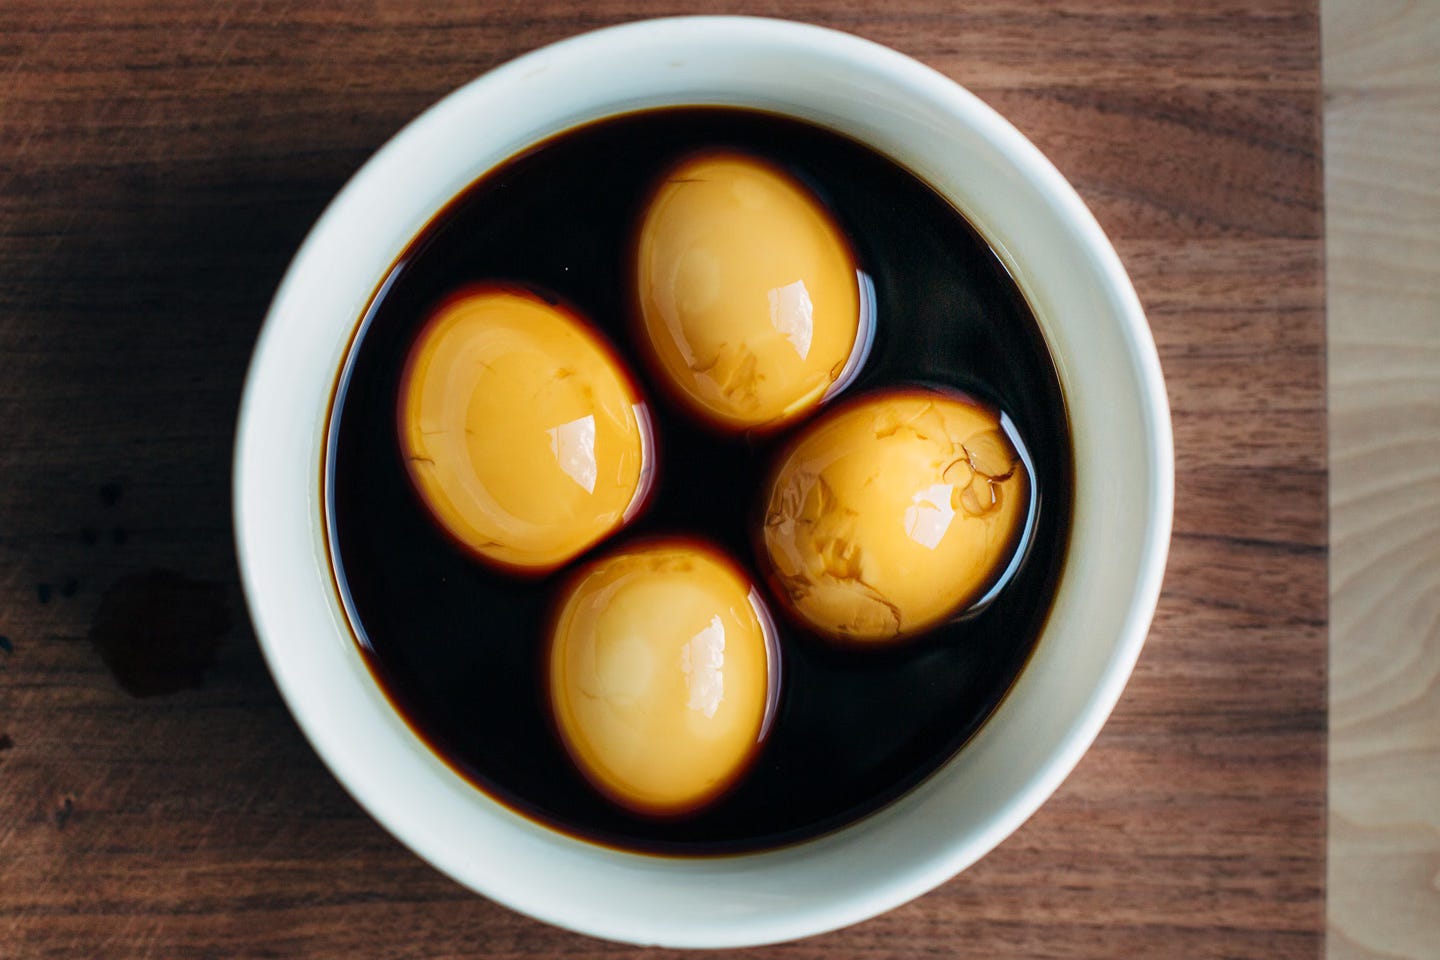 Four eggs marinating in soy sauce